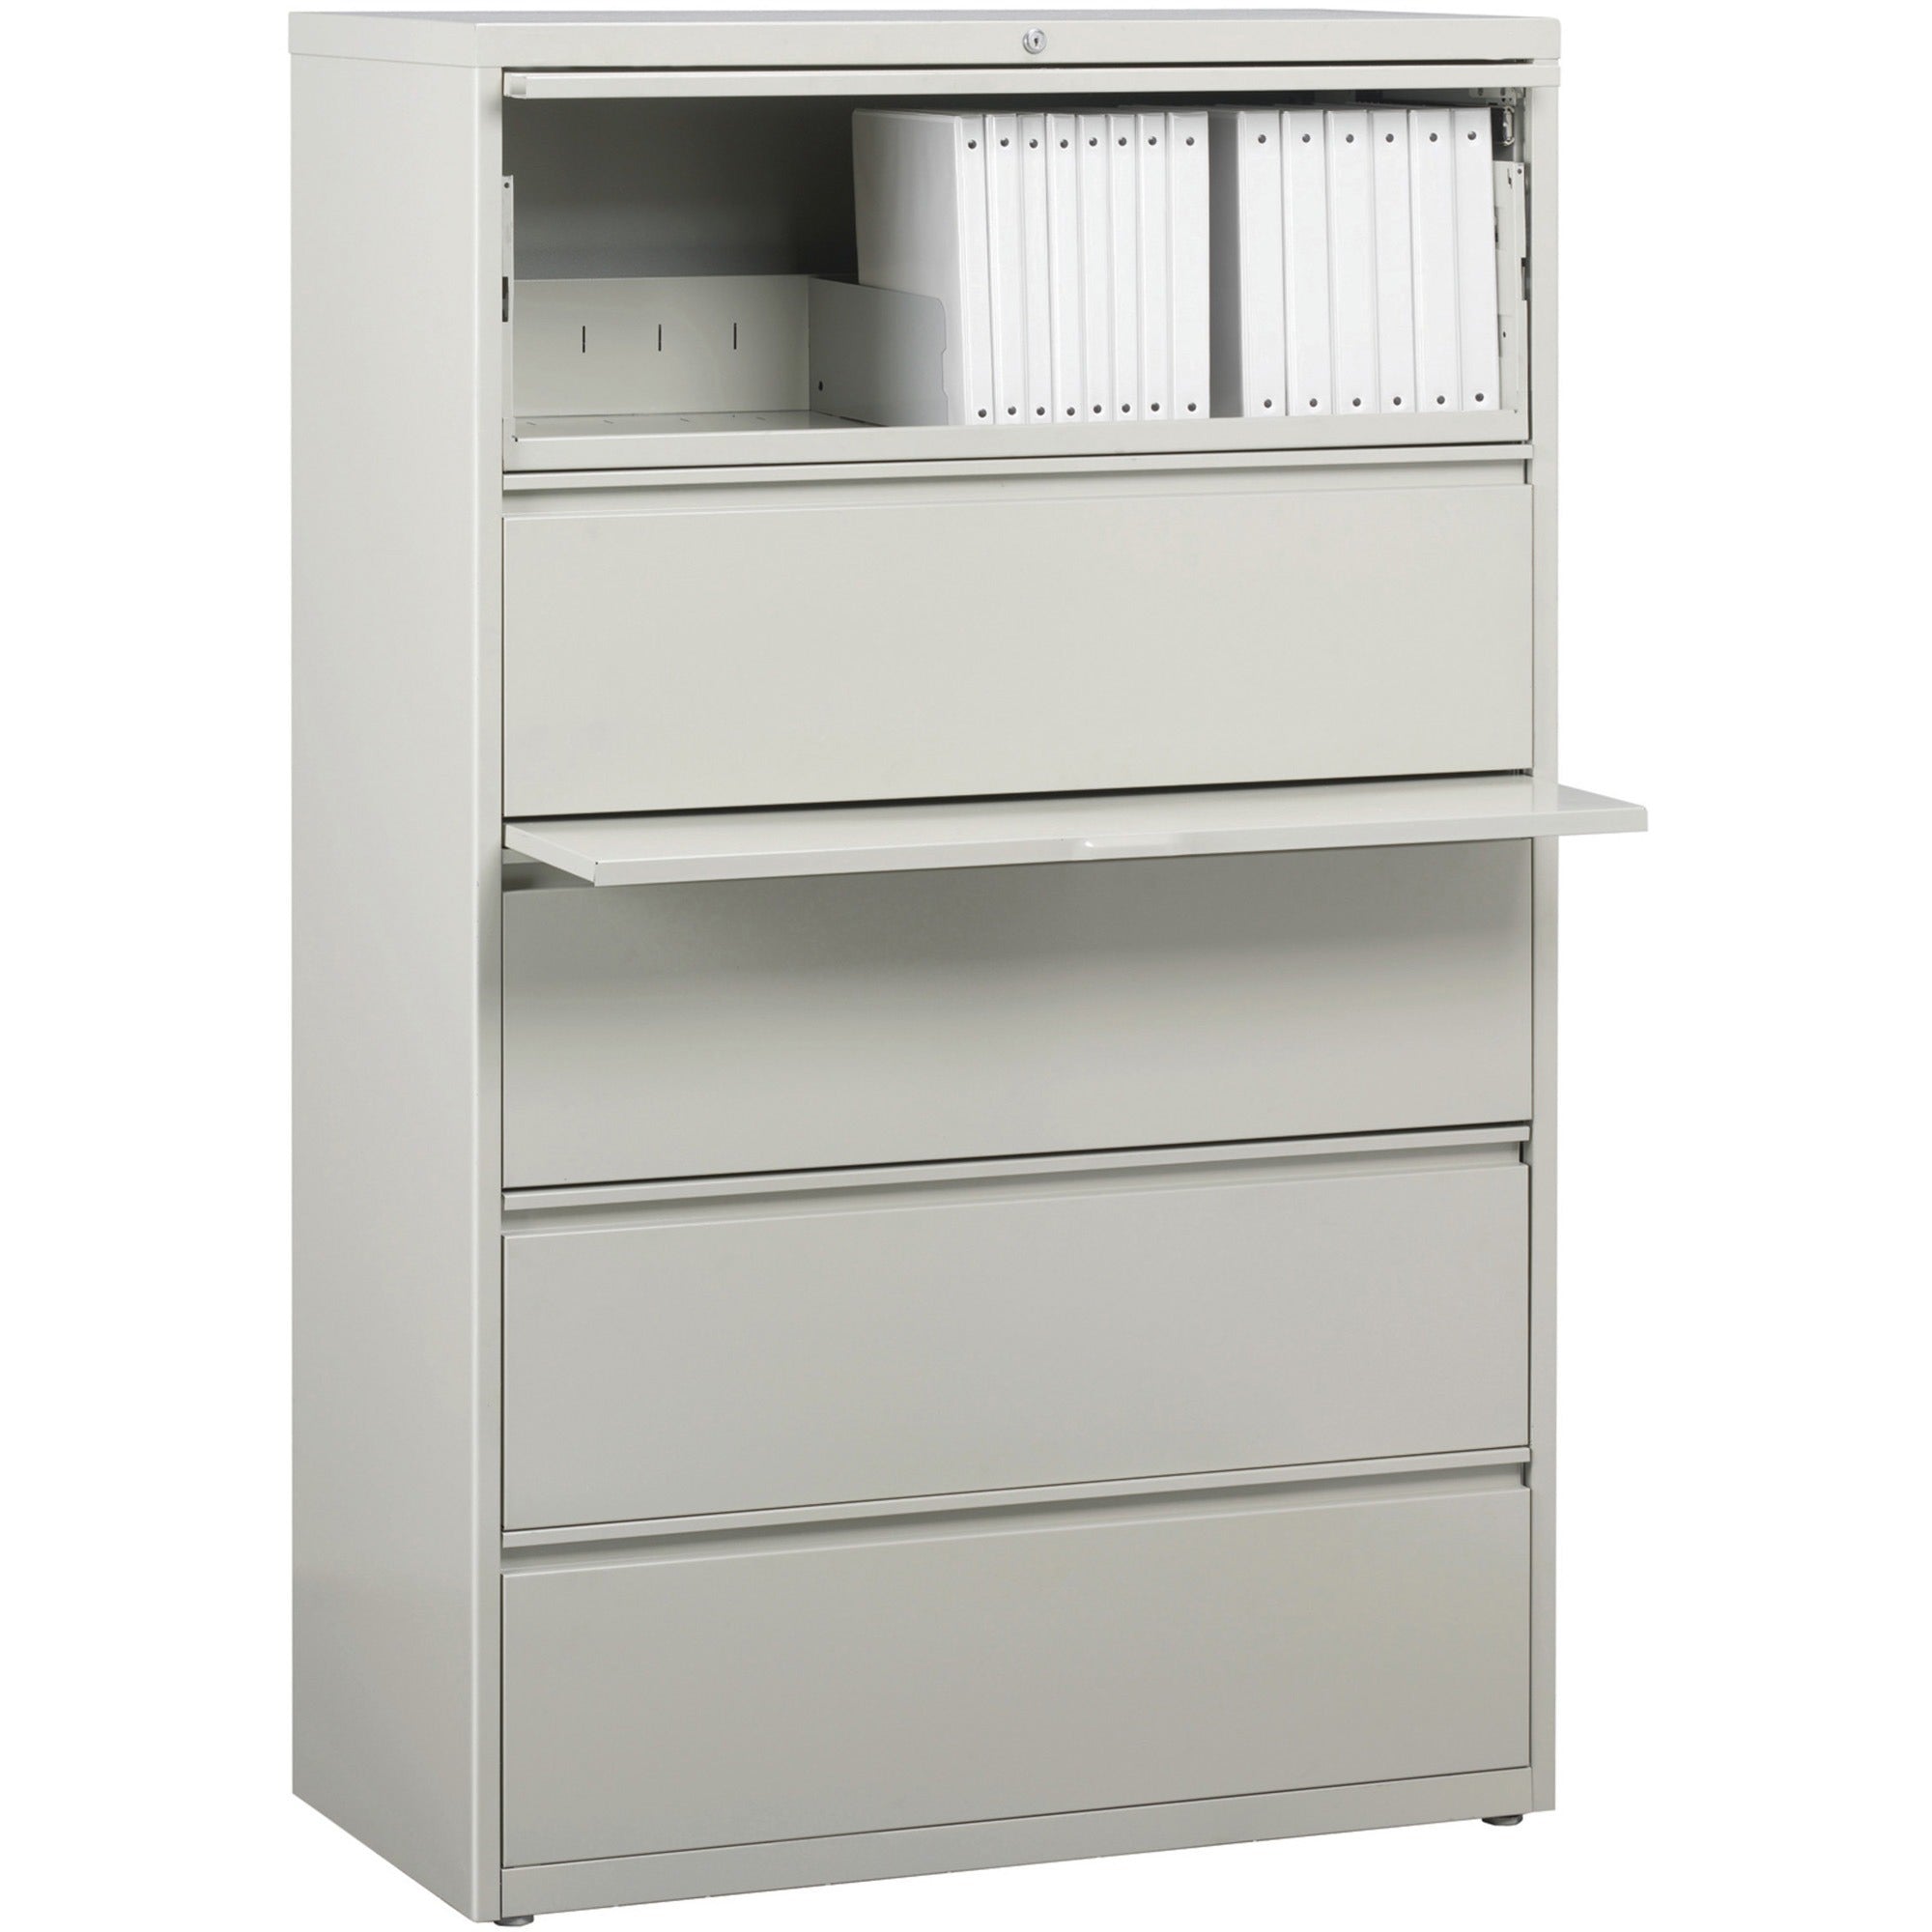 Lorell Fortress Series Lateral File w/Roll-out Posting Shelf - 36" x 18.6" x 67.7" - 5 x Drawer(s) for File - Legal, Letter, A4 - Lateral - Rust Proof, Leveling Glide, Interlocking, Ball-bearing Suspension, Label Holder - Light Gray - Baked Enamel - - 